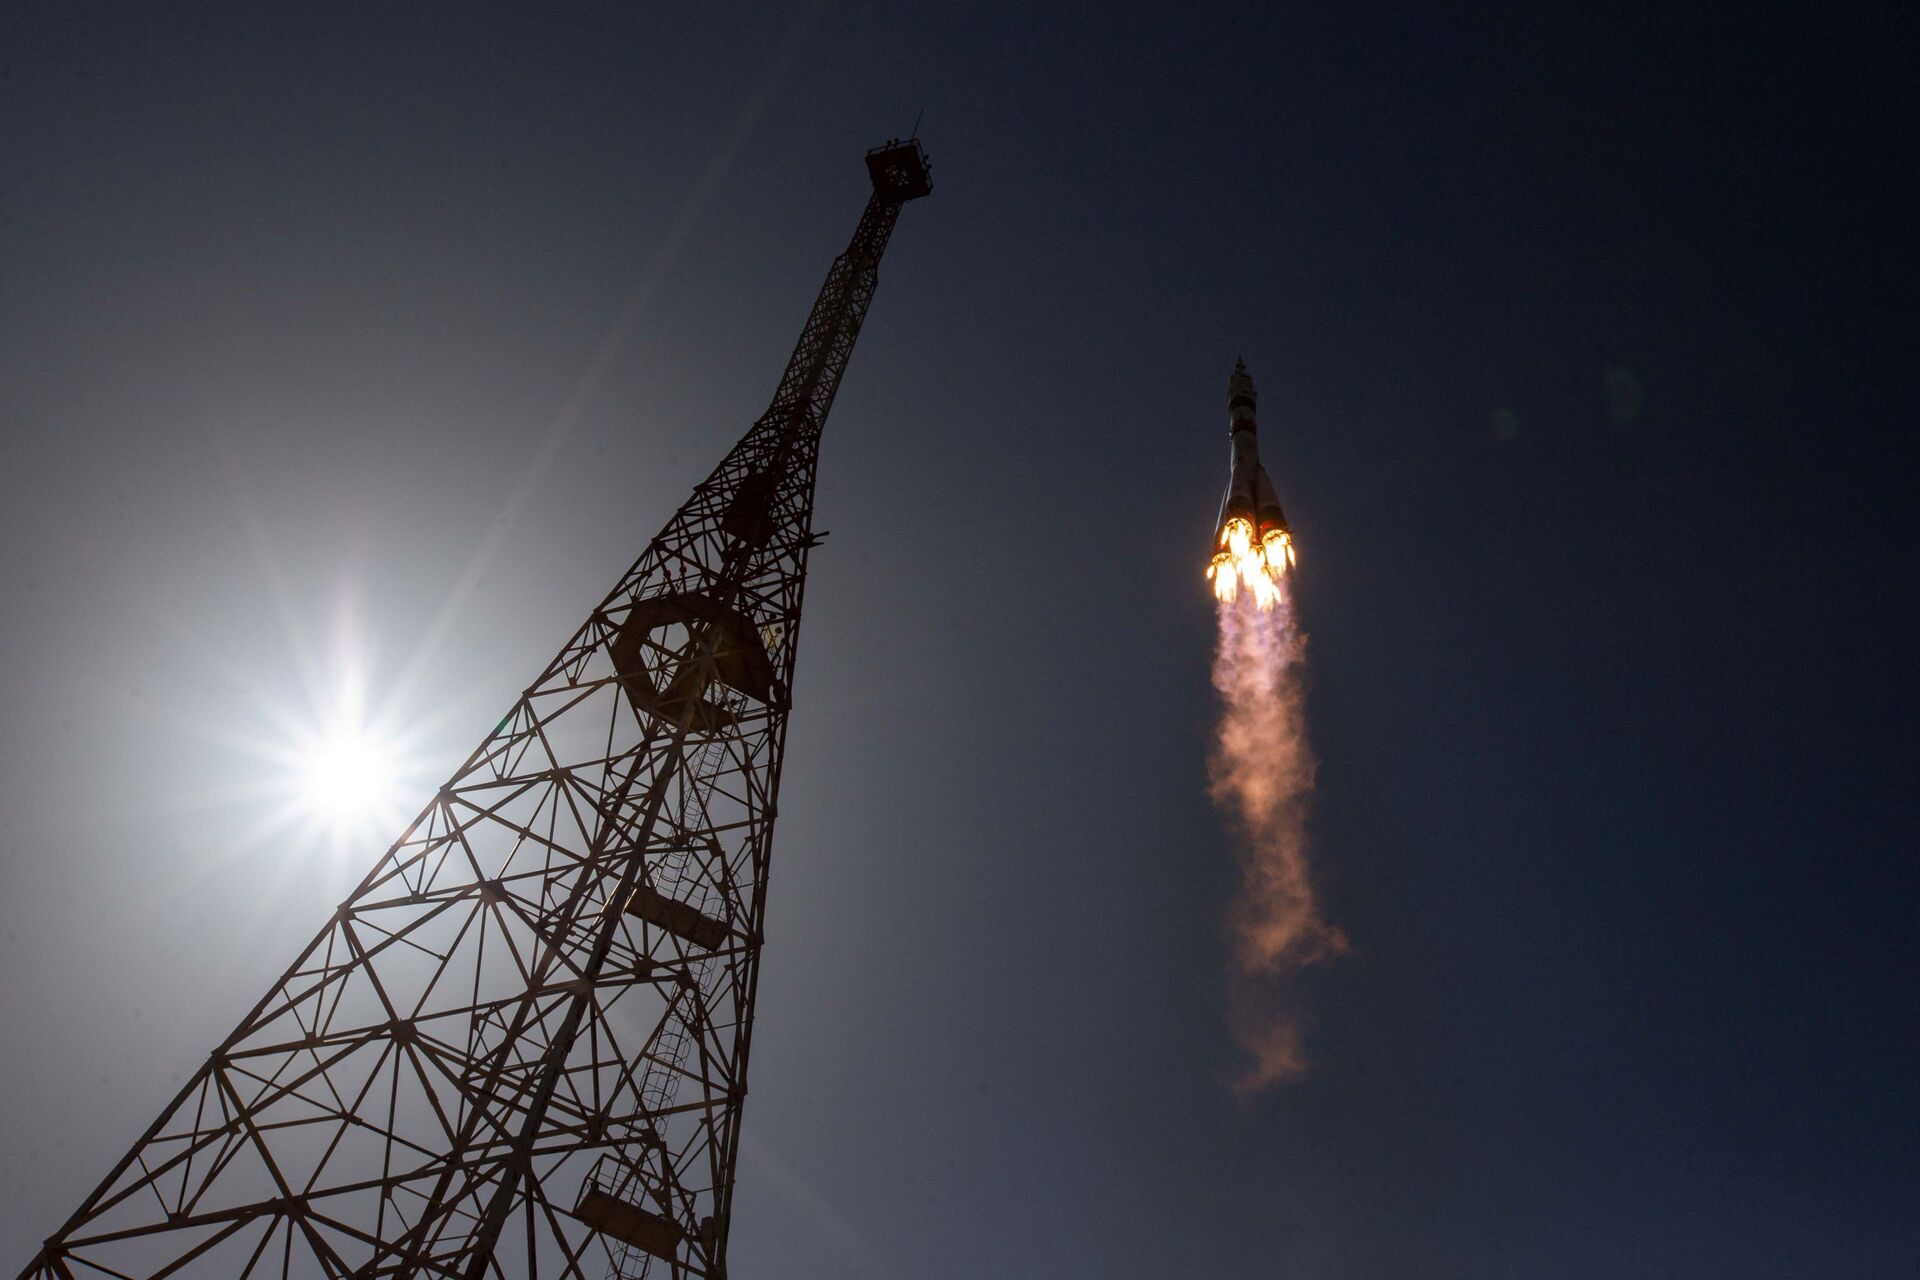 The Soyuz MS-18 spacecraft carrying the crew formed of Mark Vande Hei of NASA and cosmonauts Oleg Novitskiy and Pyotr Dubrov of Roscosmos blasts off to the International Space Station (ISS) from the launchpad at the Baikonur Cosmodrome, Kazakhstan April 9, 2021. - Sputnik International, 1920, 23.09.2021